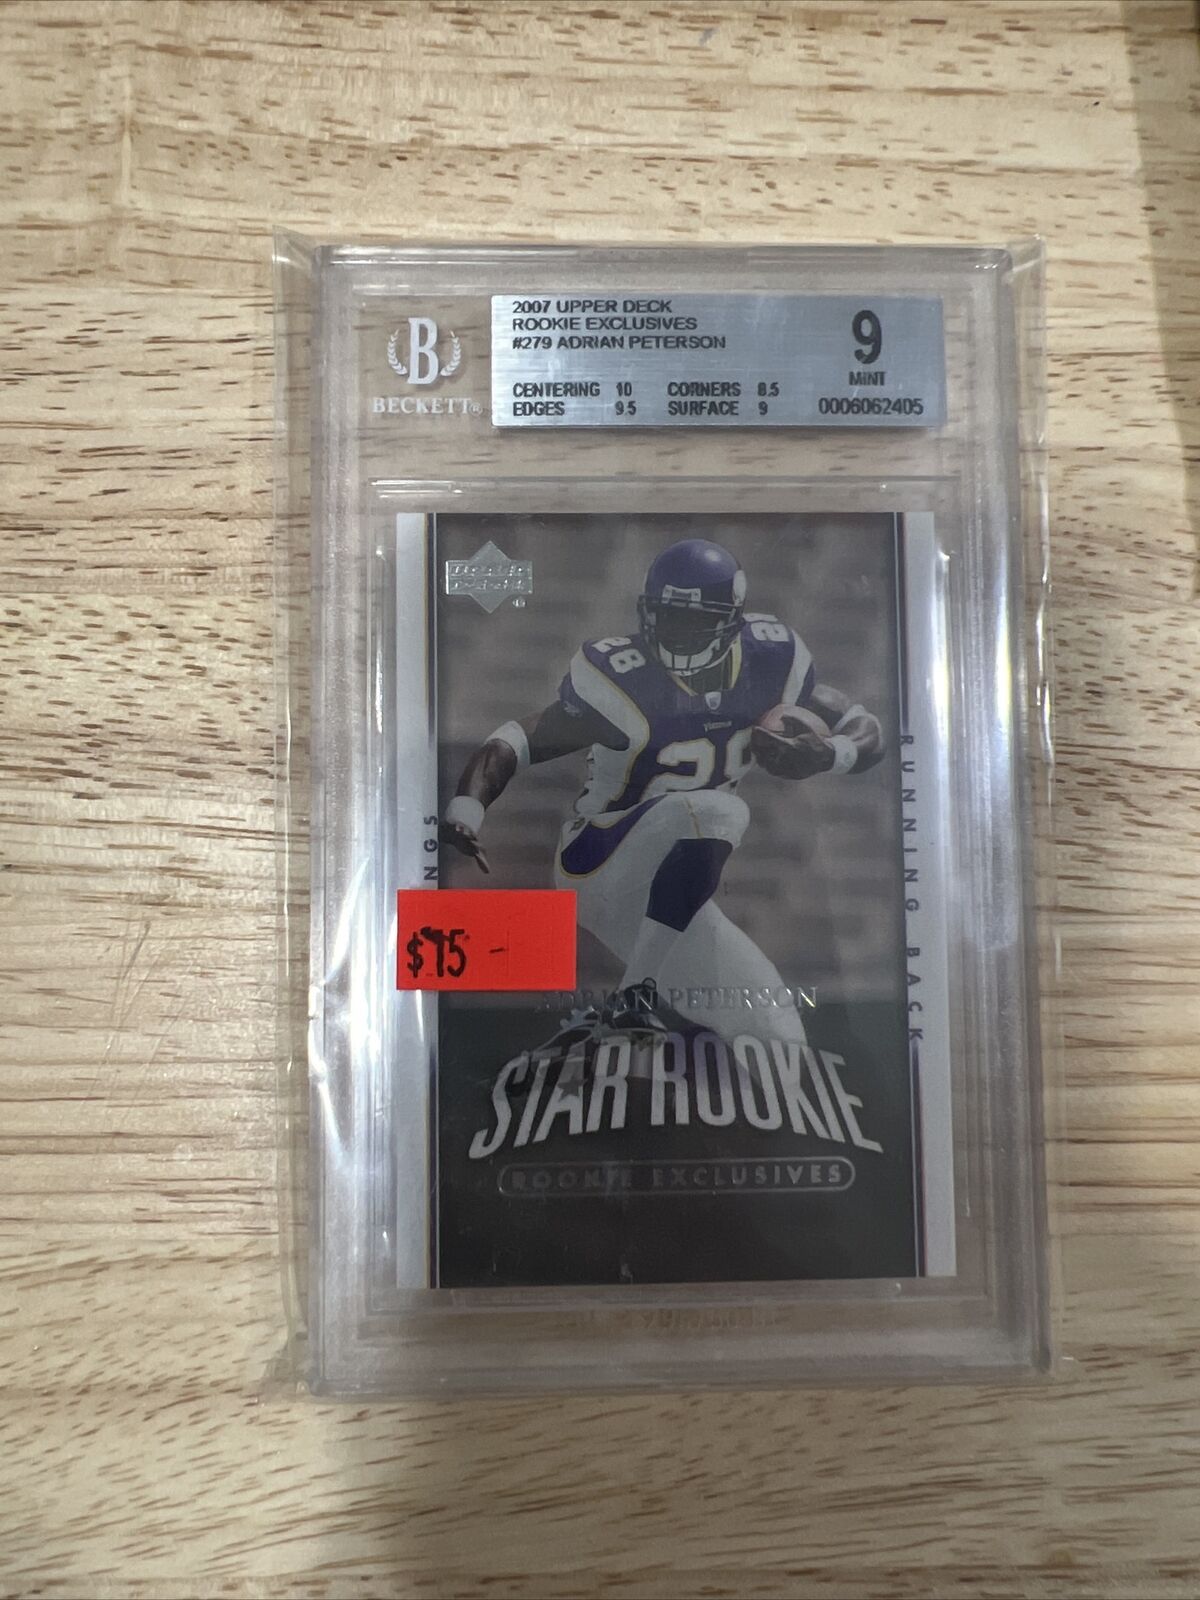 Adrian Peterson 2007 Upper Deck ROOKIE EXCLUSIVES #279 BGS 9 Mint